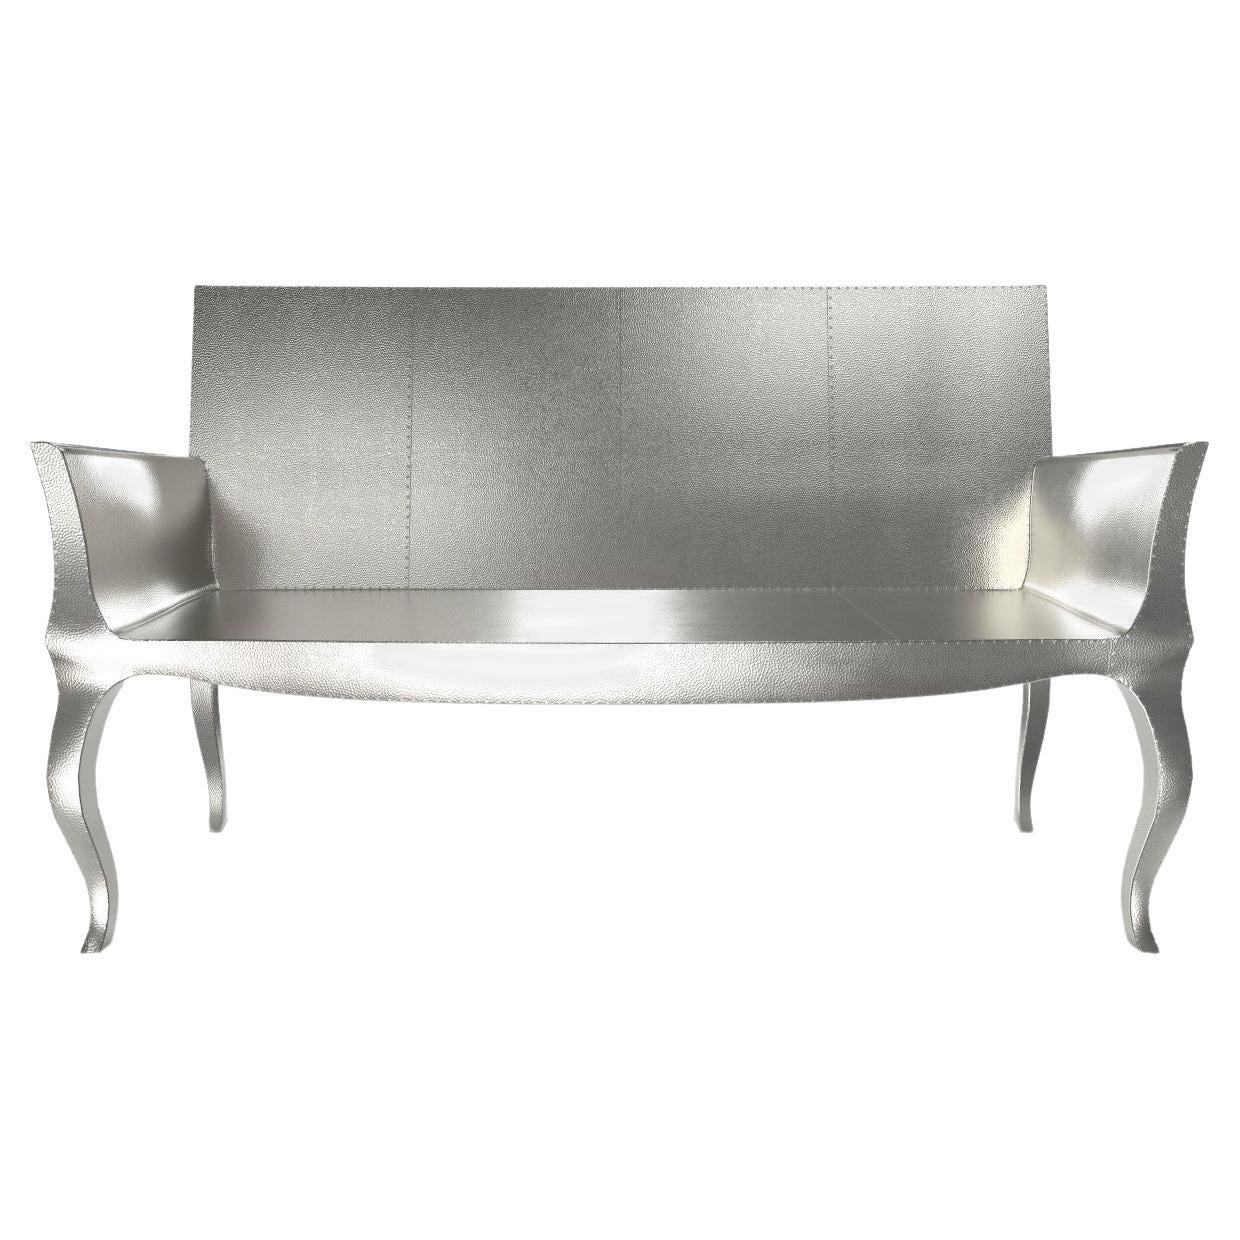 Louise Settee Art Deco Daybeds in Mid. Hammered White Bronze by Paul Mathieu For Sale